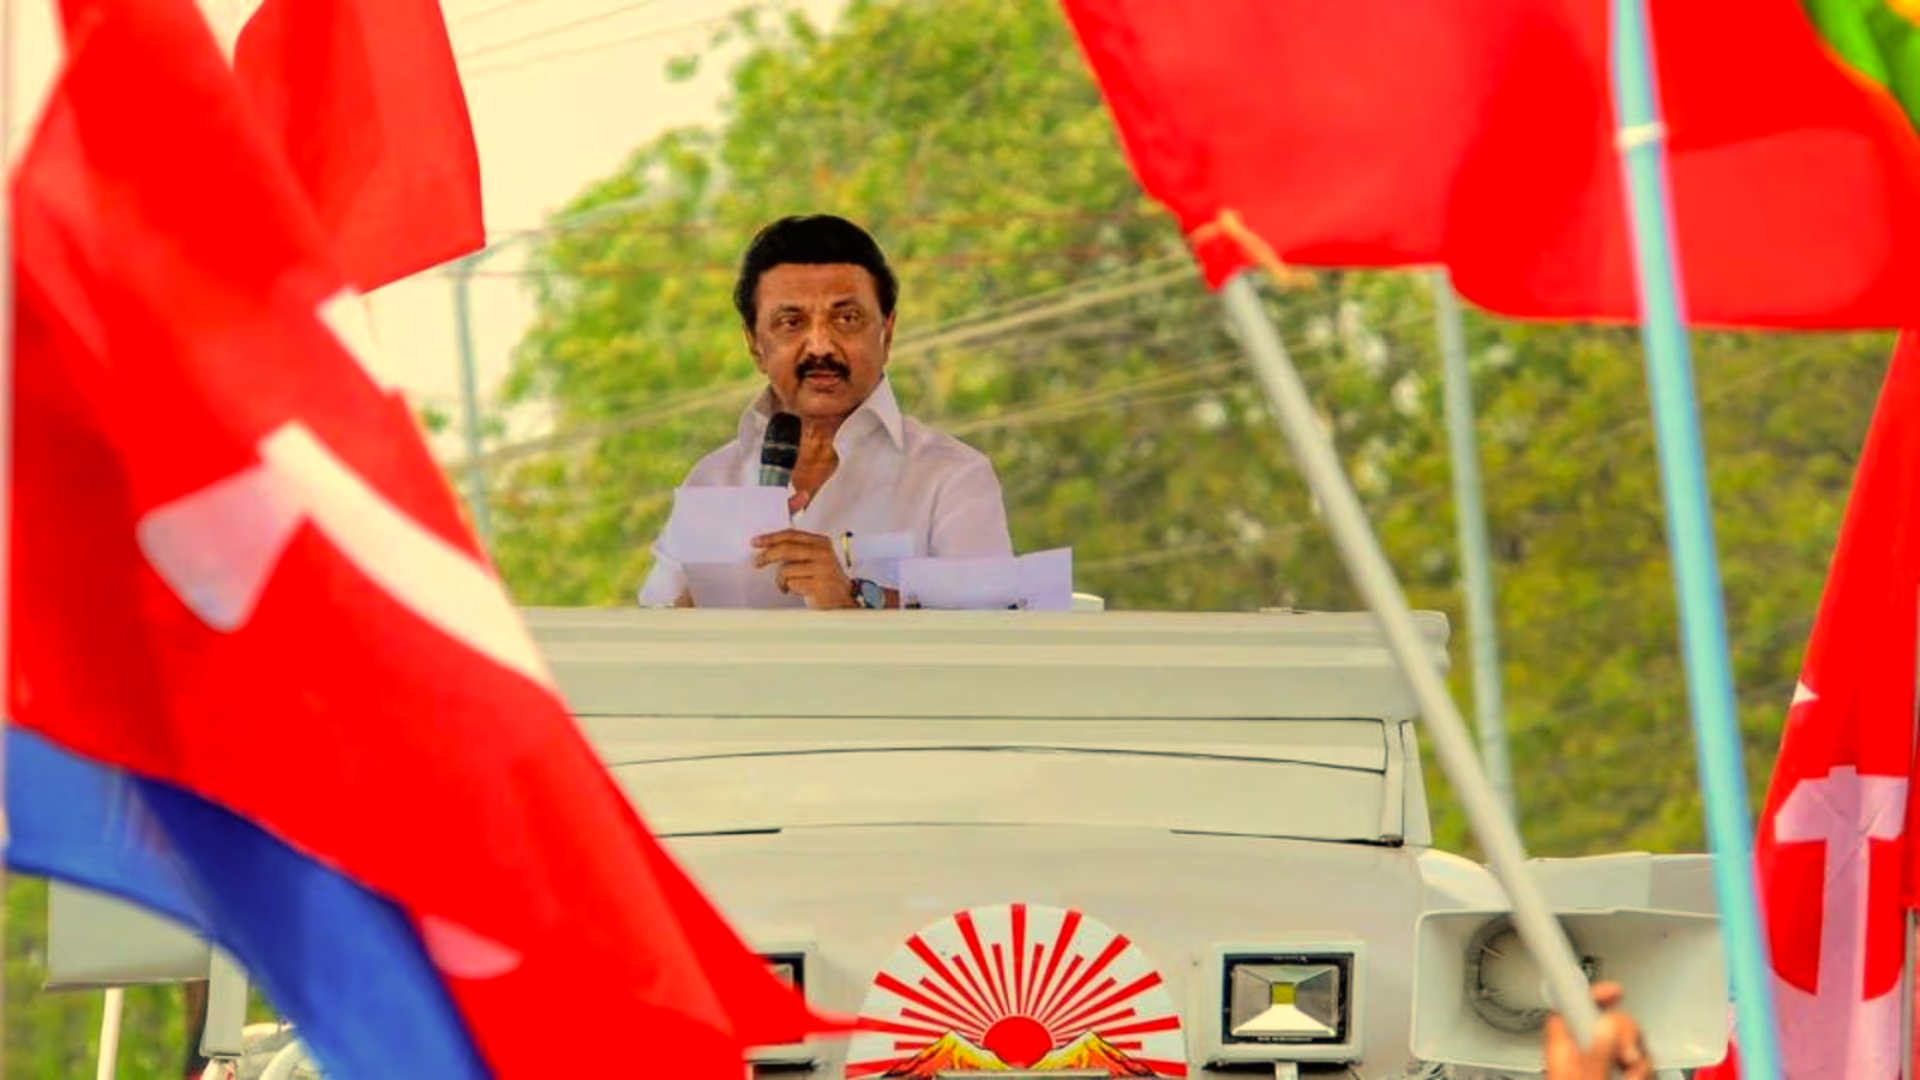 Stalin’s DMK Finalises Seat Sharing Allies For Upcoming Polls